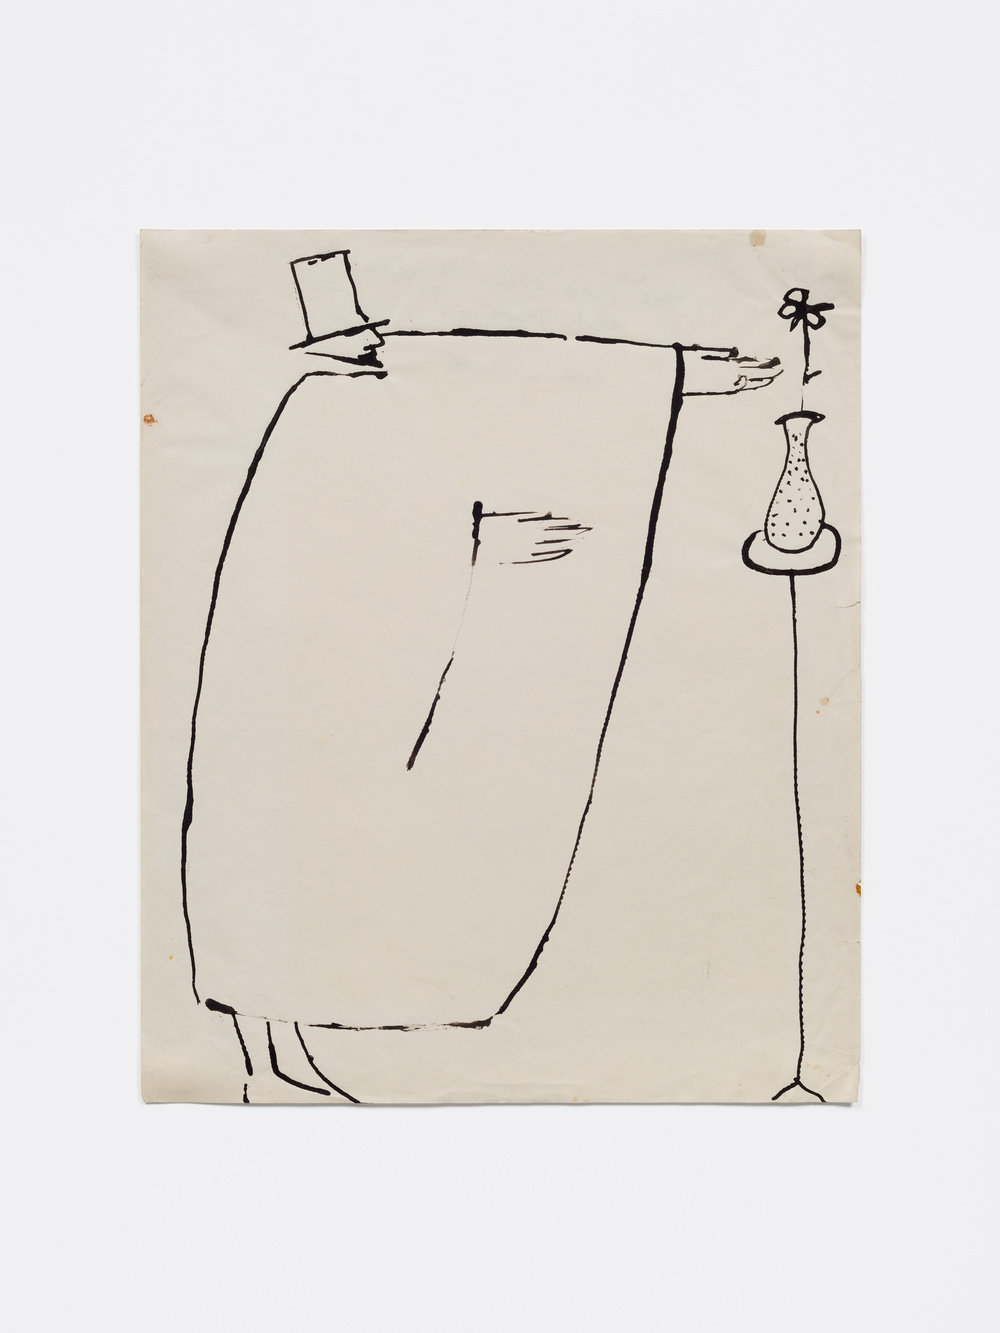 Grooms, the magician, 1955, ink on paper, 16 1 2 x 13 1 2 in., 41.9 x 34.3 cm, cnon 60.128 pierre le hors